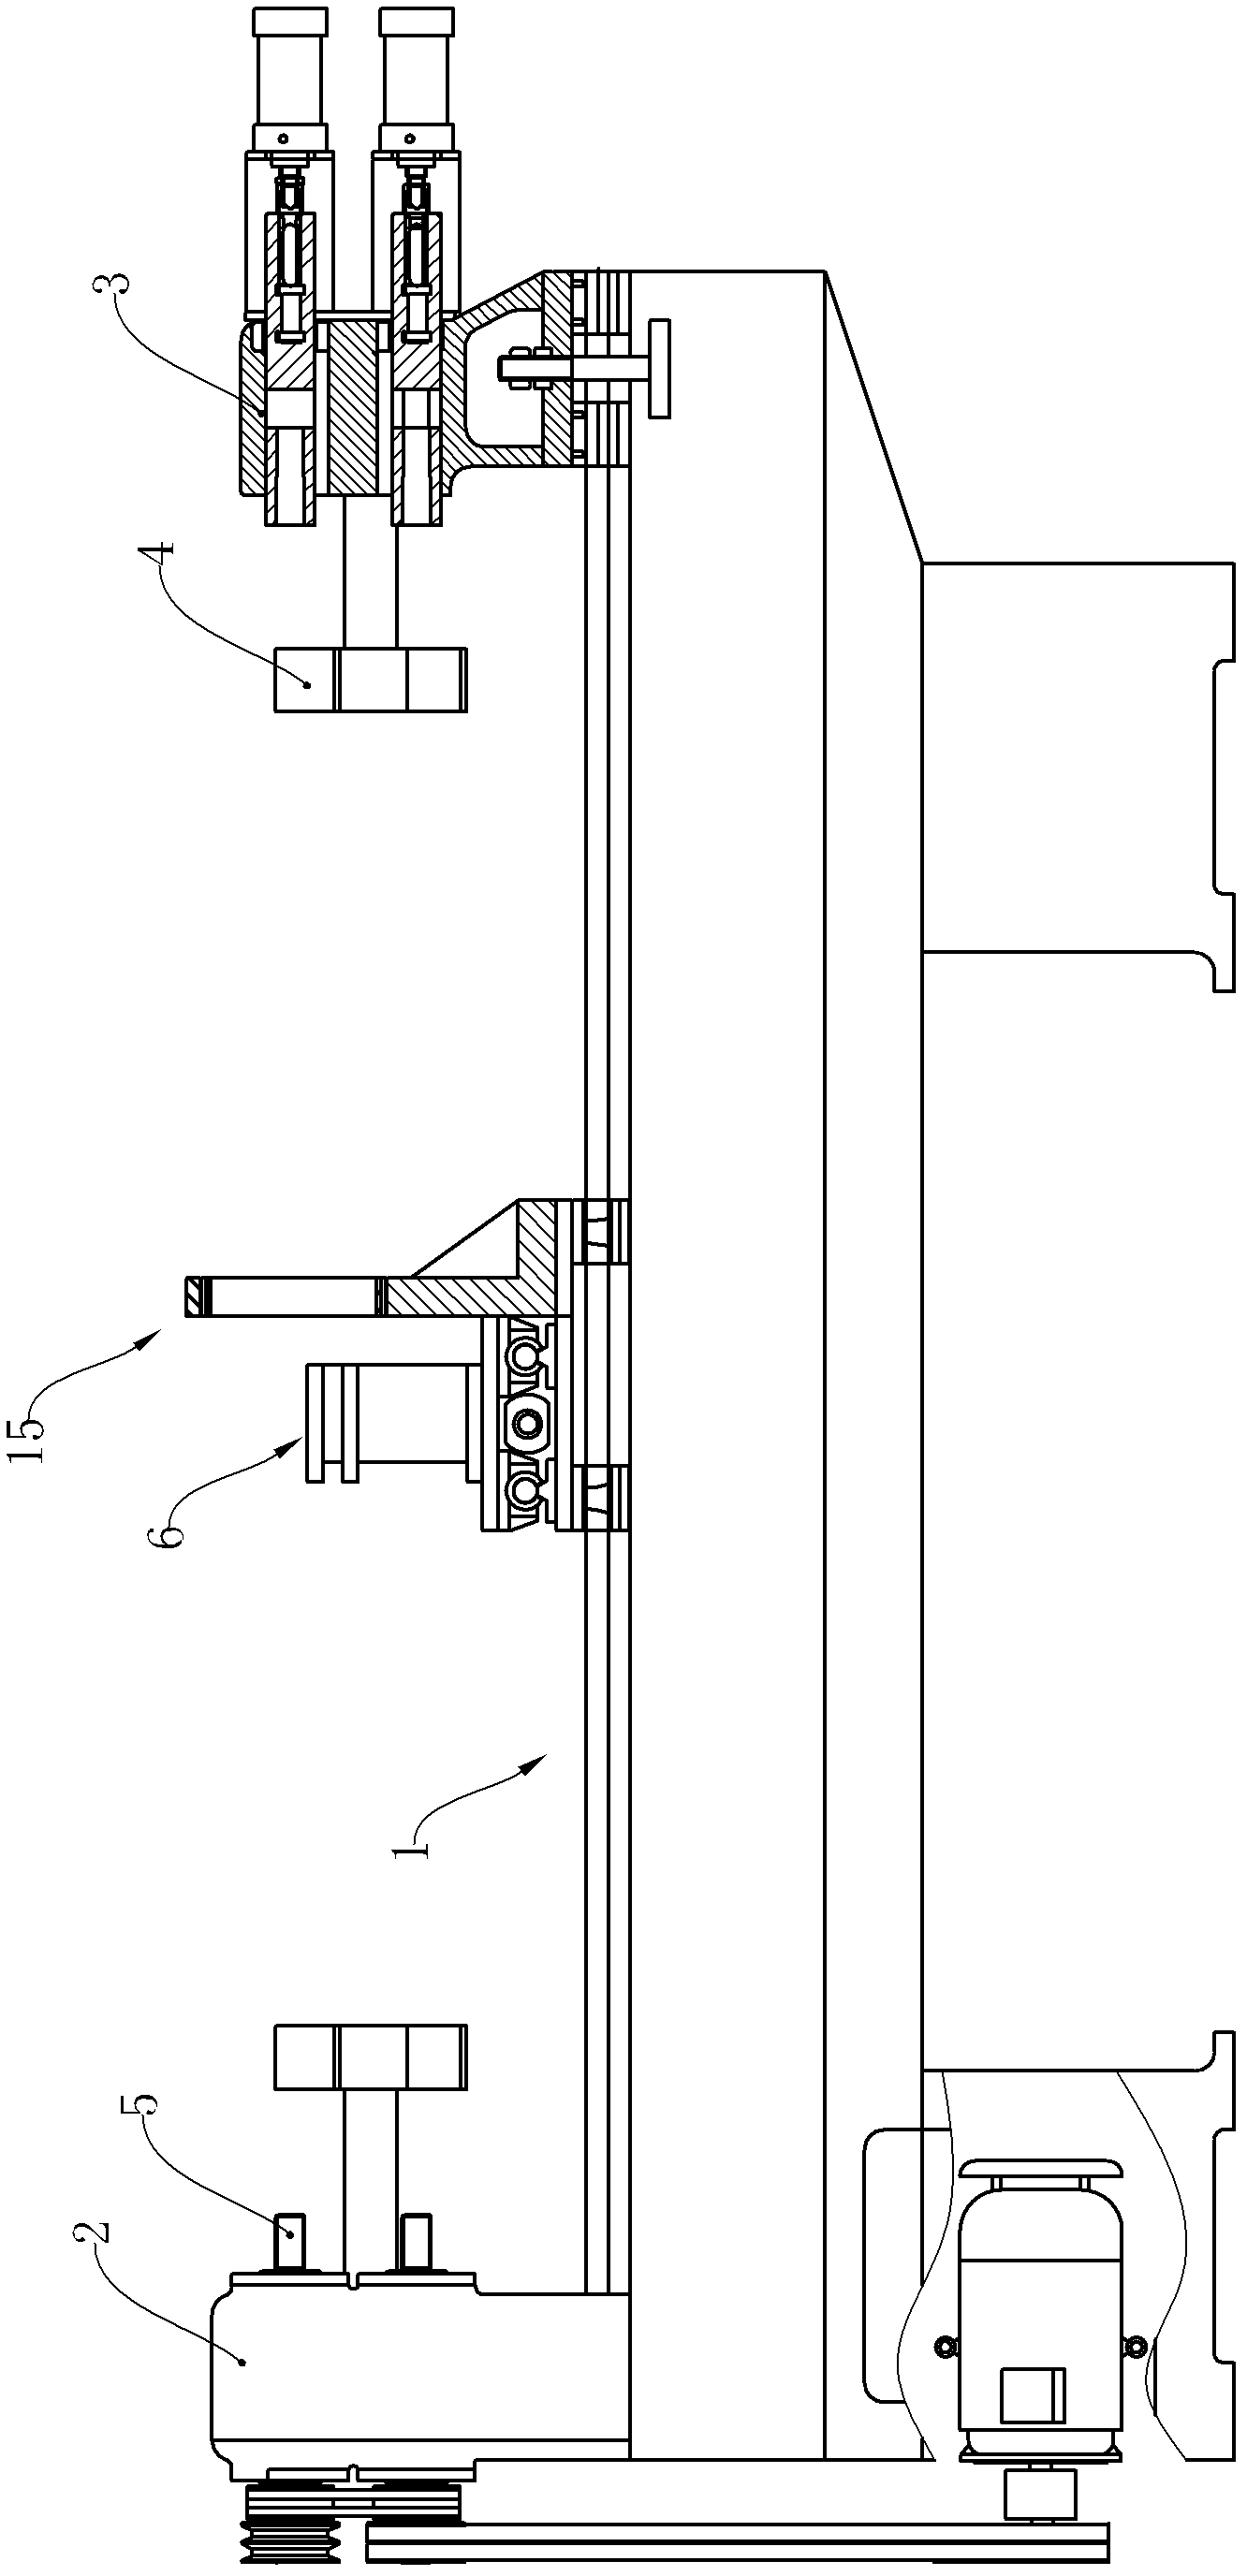 Numerical control woodworking machine tool and method for finely processing wood product thereby